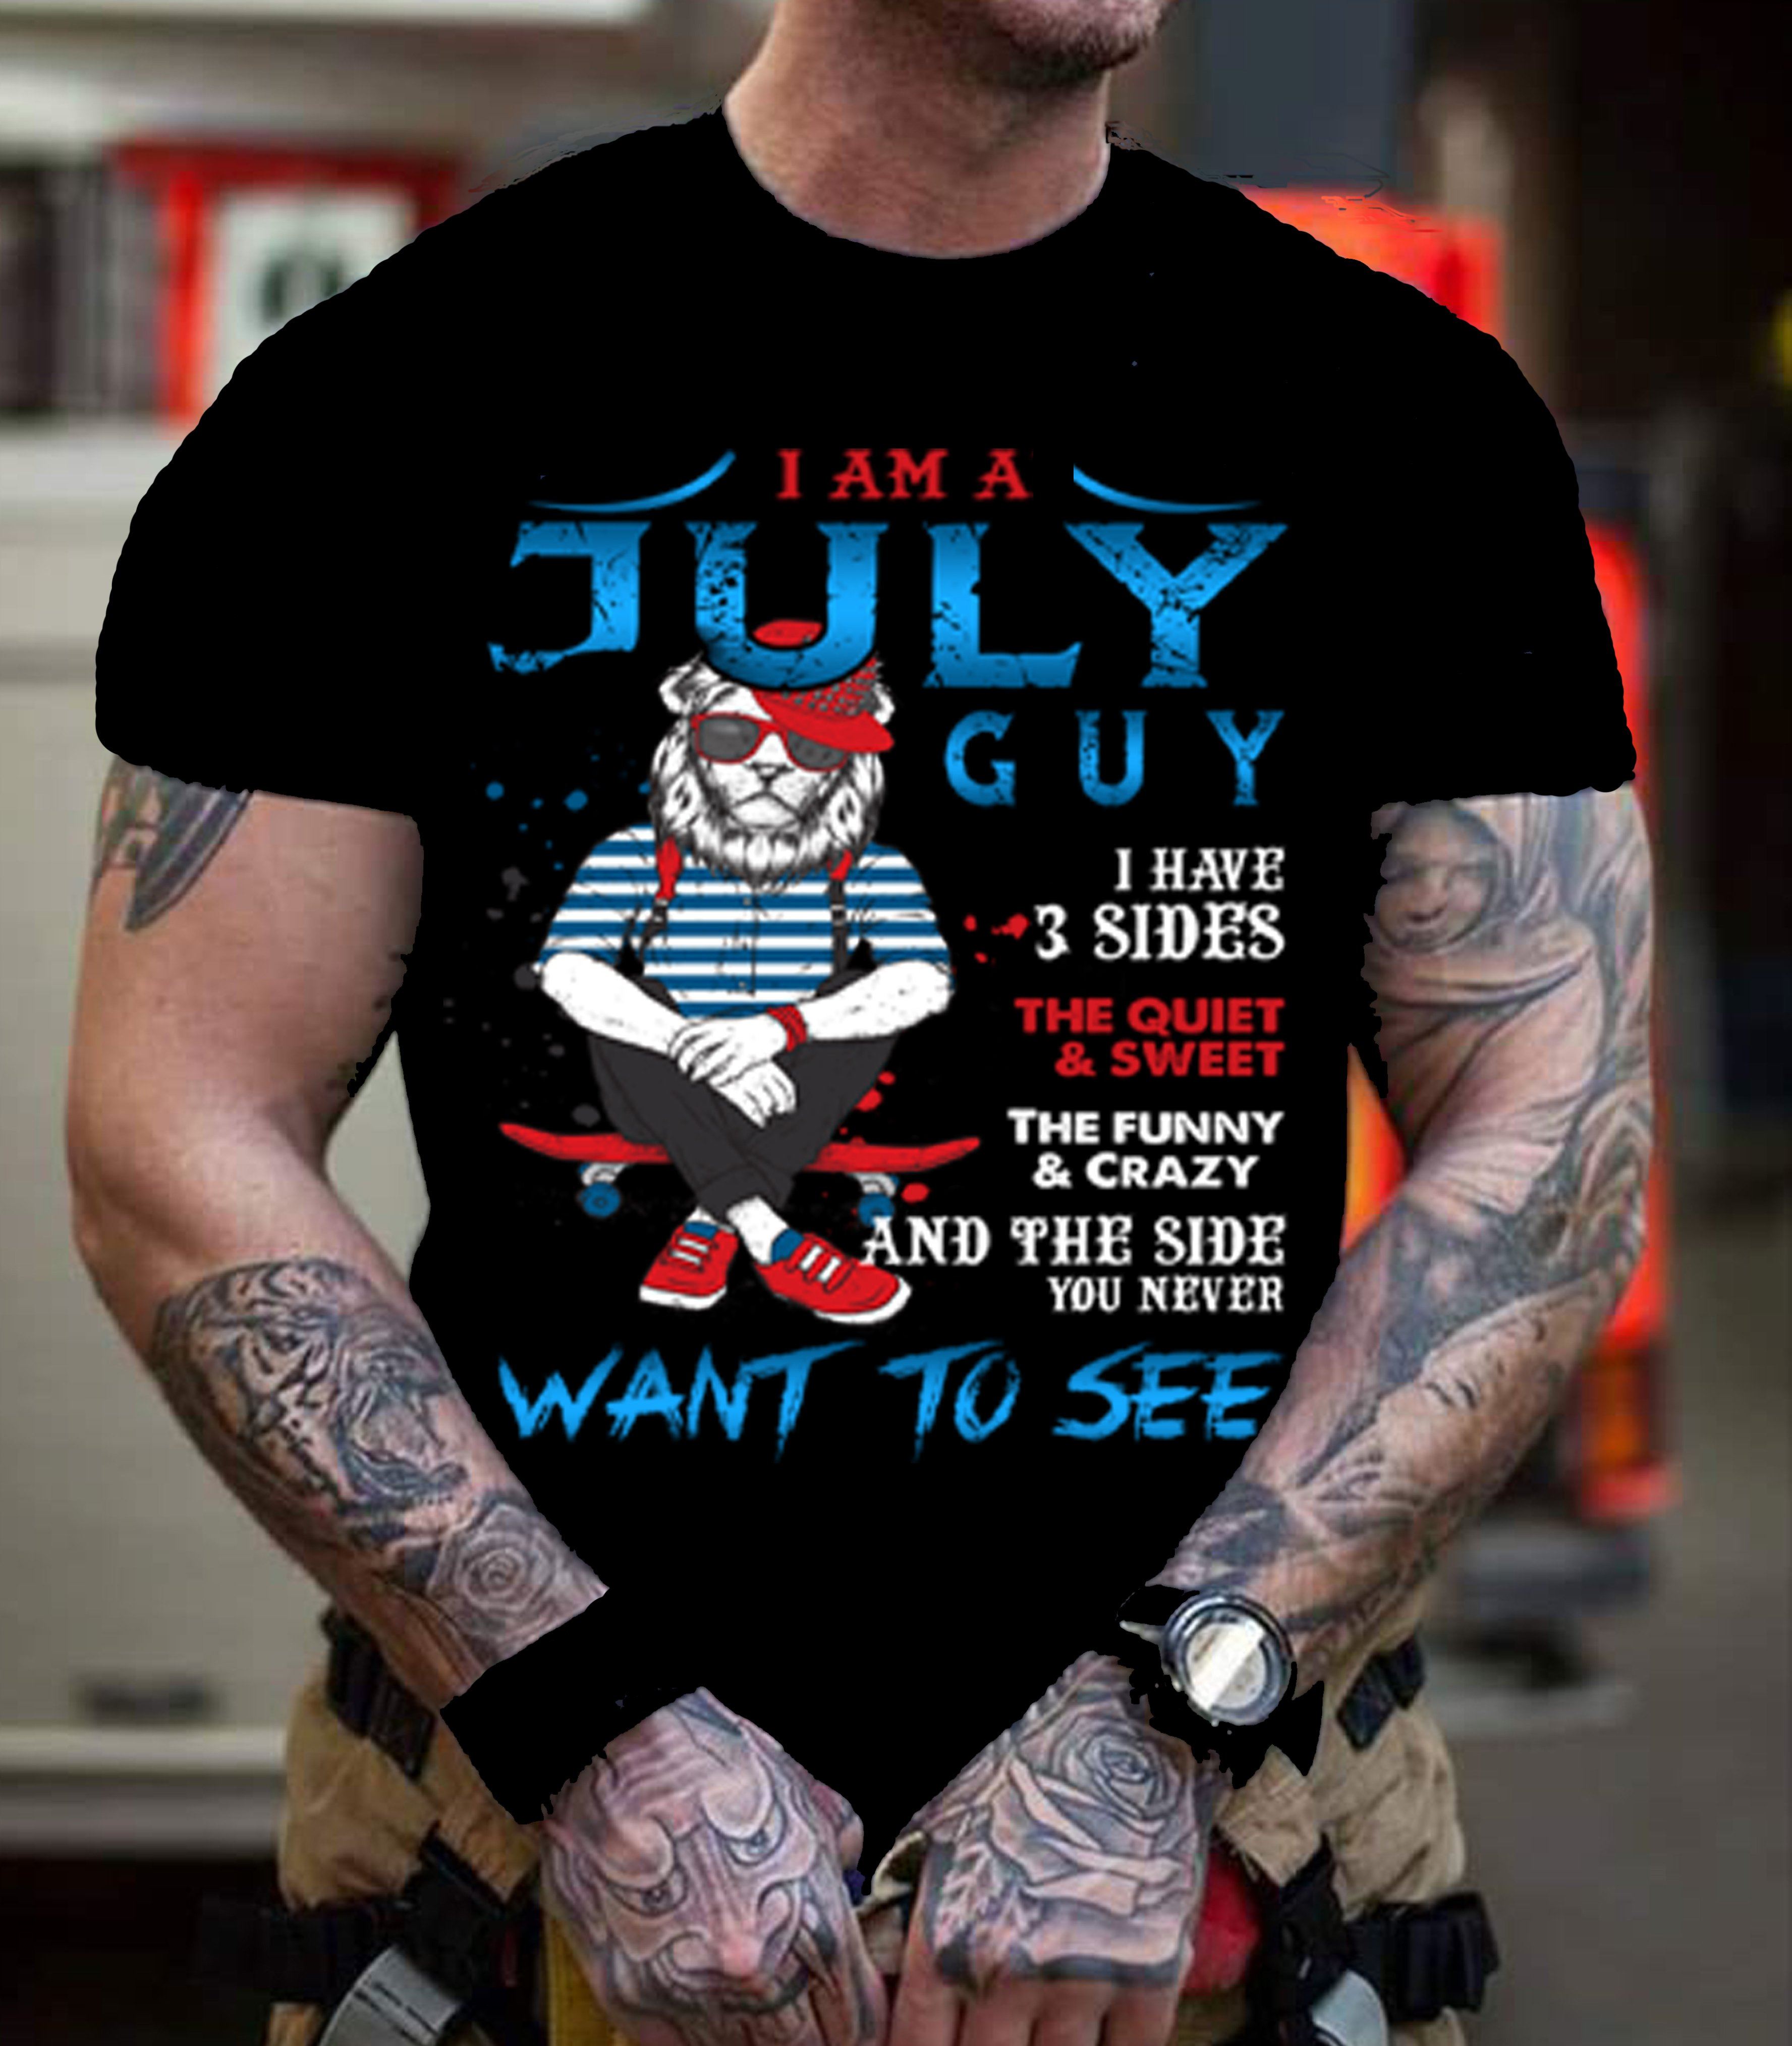 "I AM A JULY GUY I HAVE 3 SIDES THE QUIET & SWEET..."-T-SHIRT.